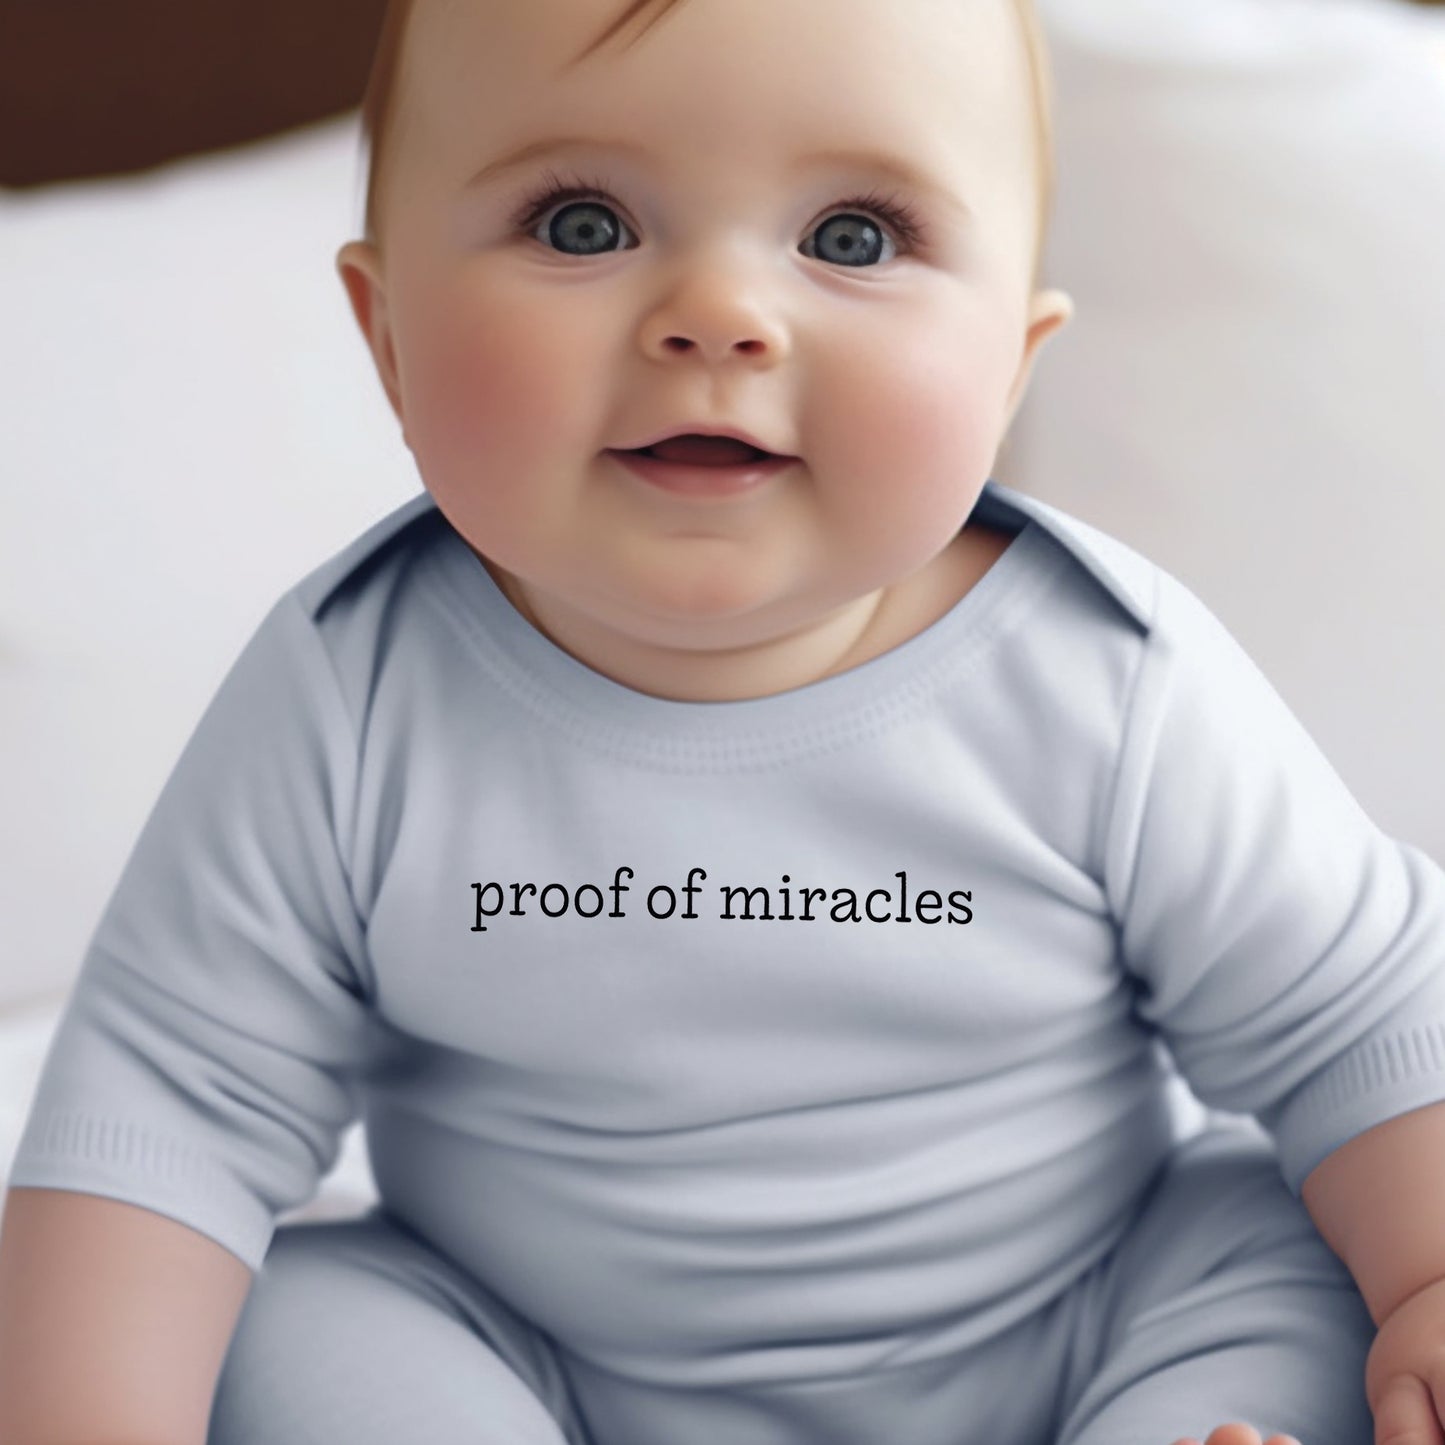 Proof of Miracles (Infant)- Single Color (black)- 4.5" wide Plastisol Screen Print Transfer